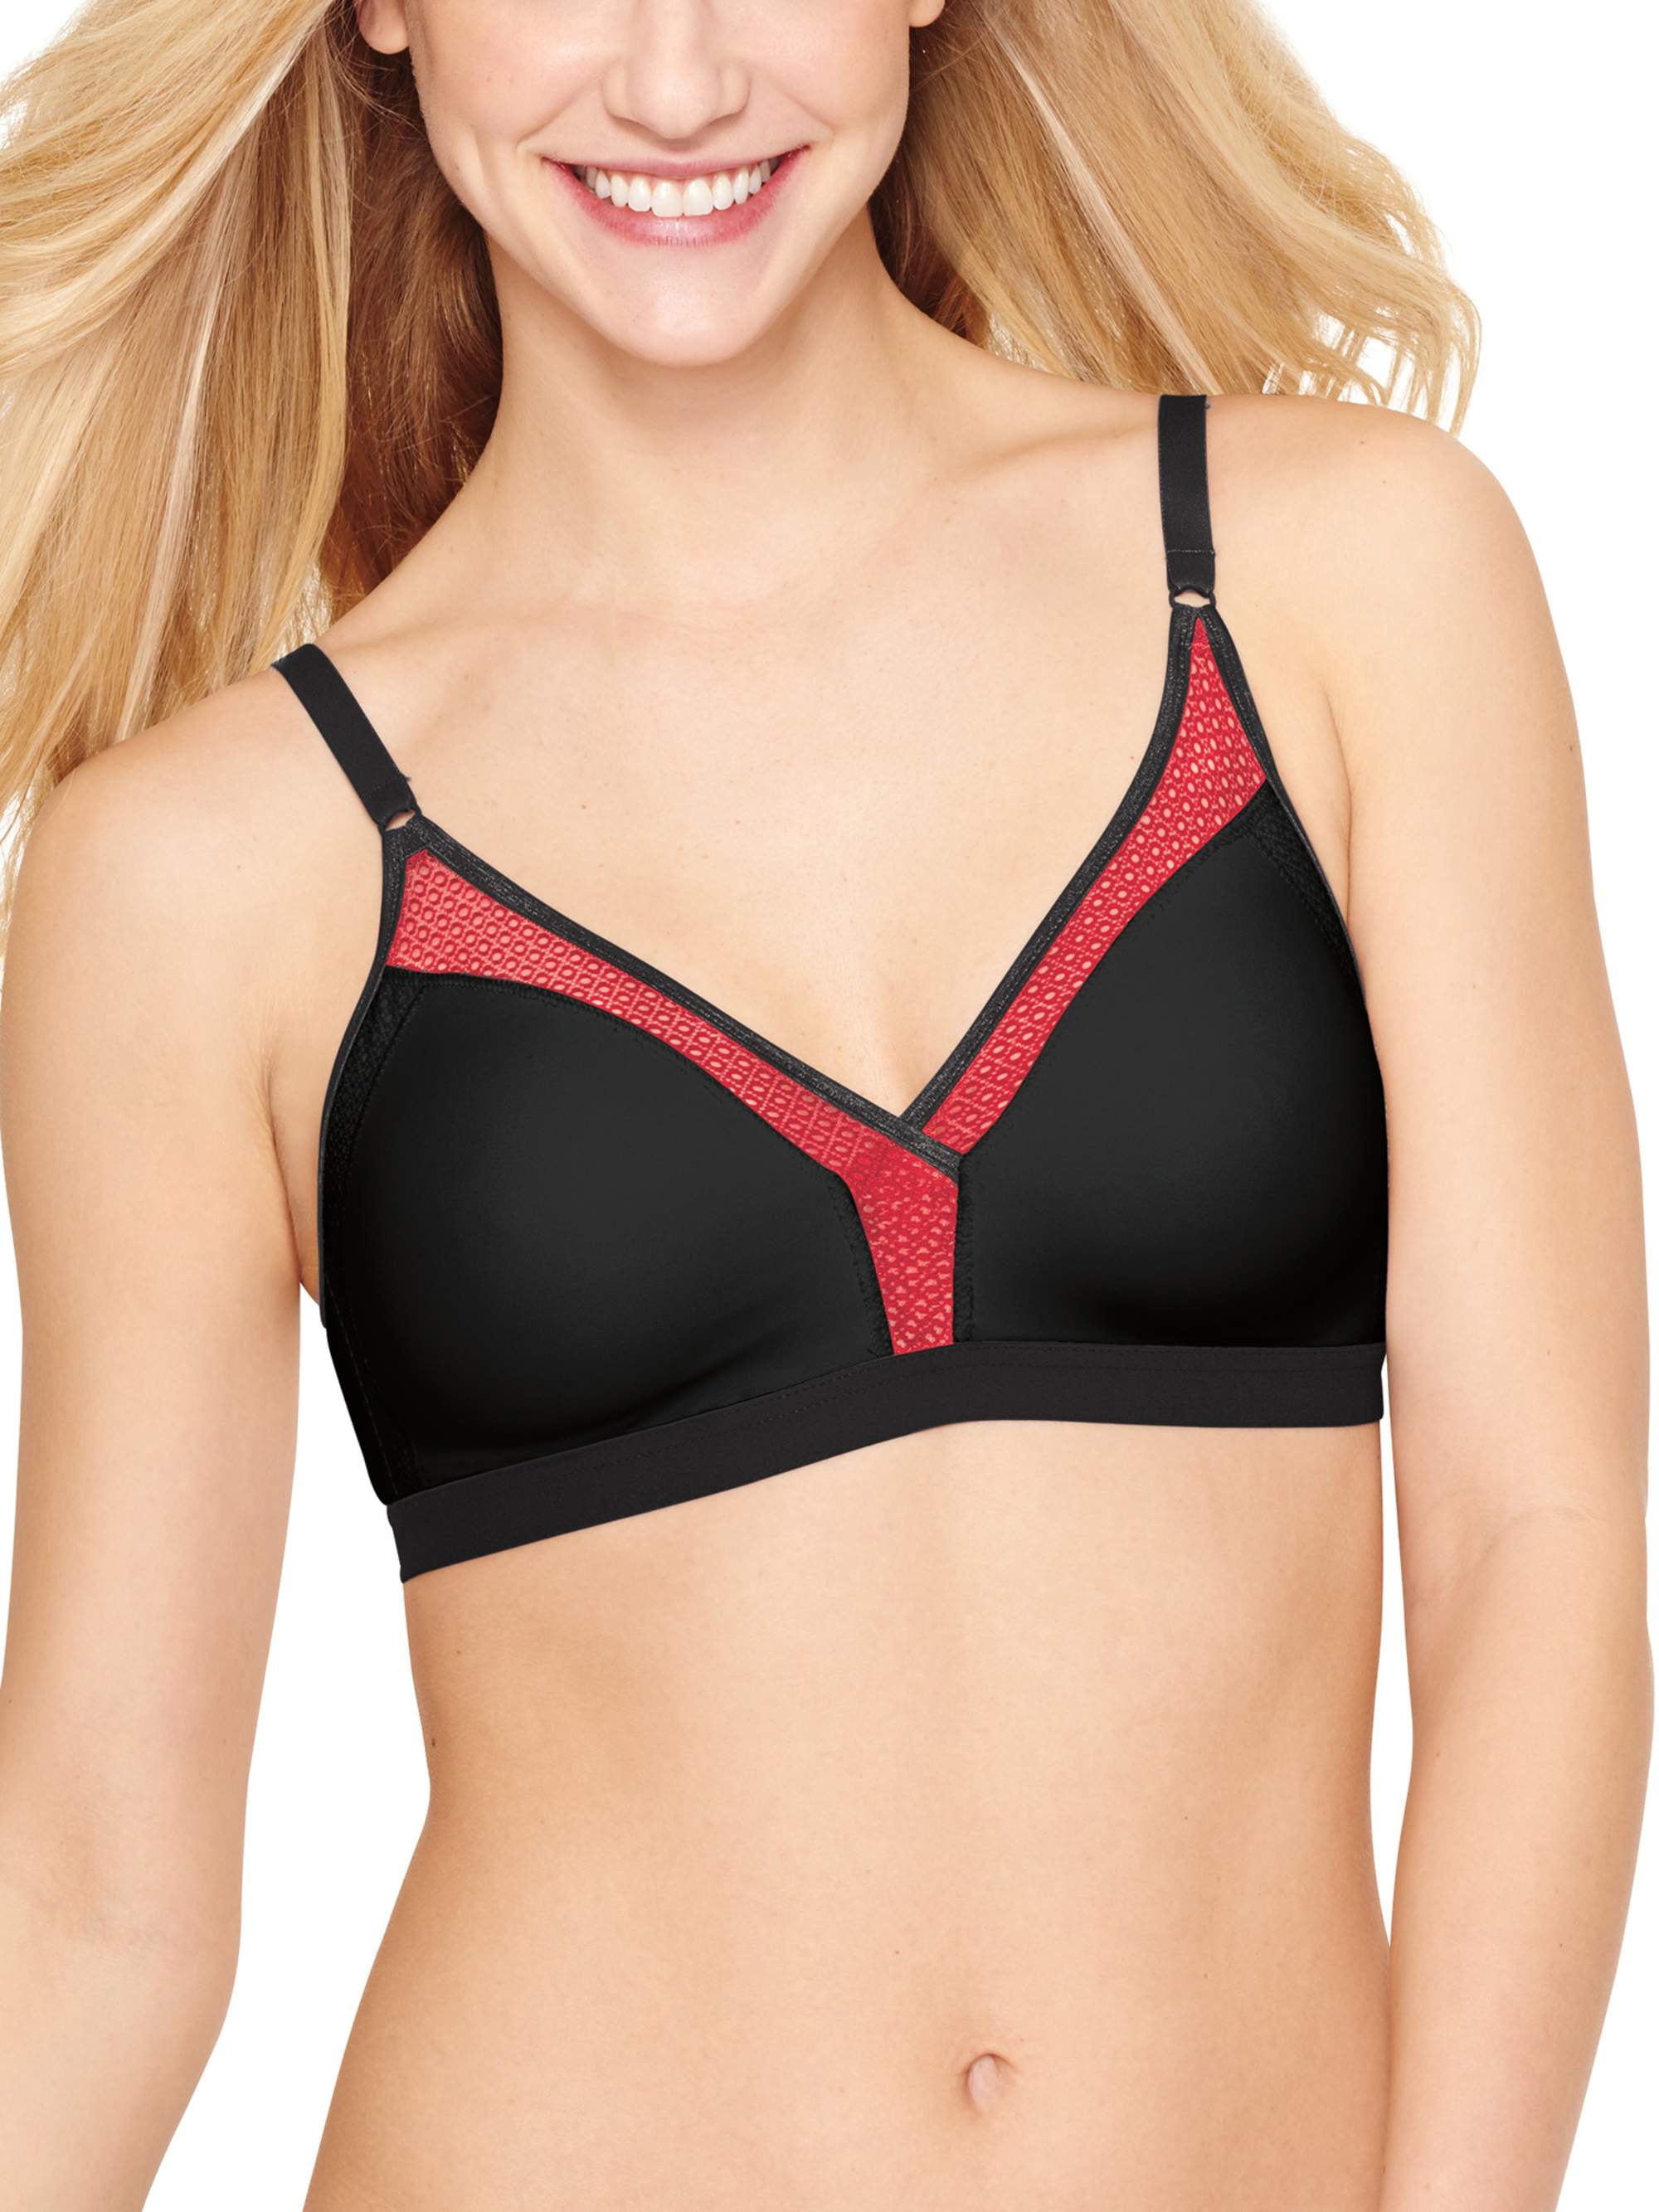 Hanes Women's X-Temp Unlined Wirefree Convertible, Black/Diva Pink, Small